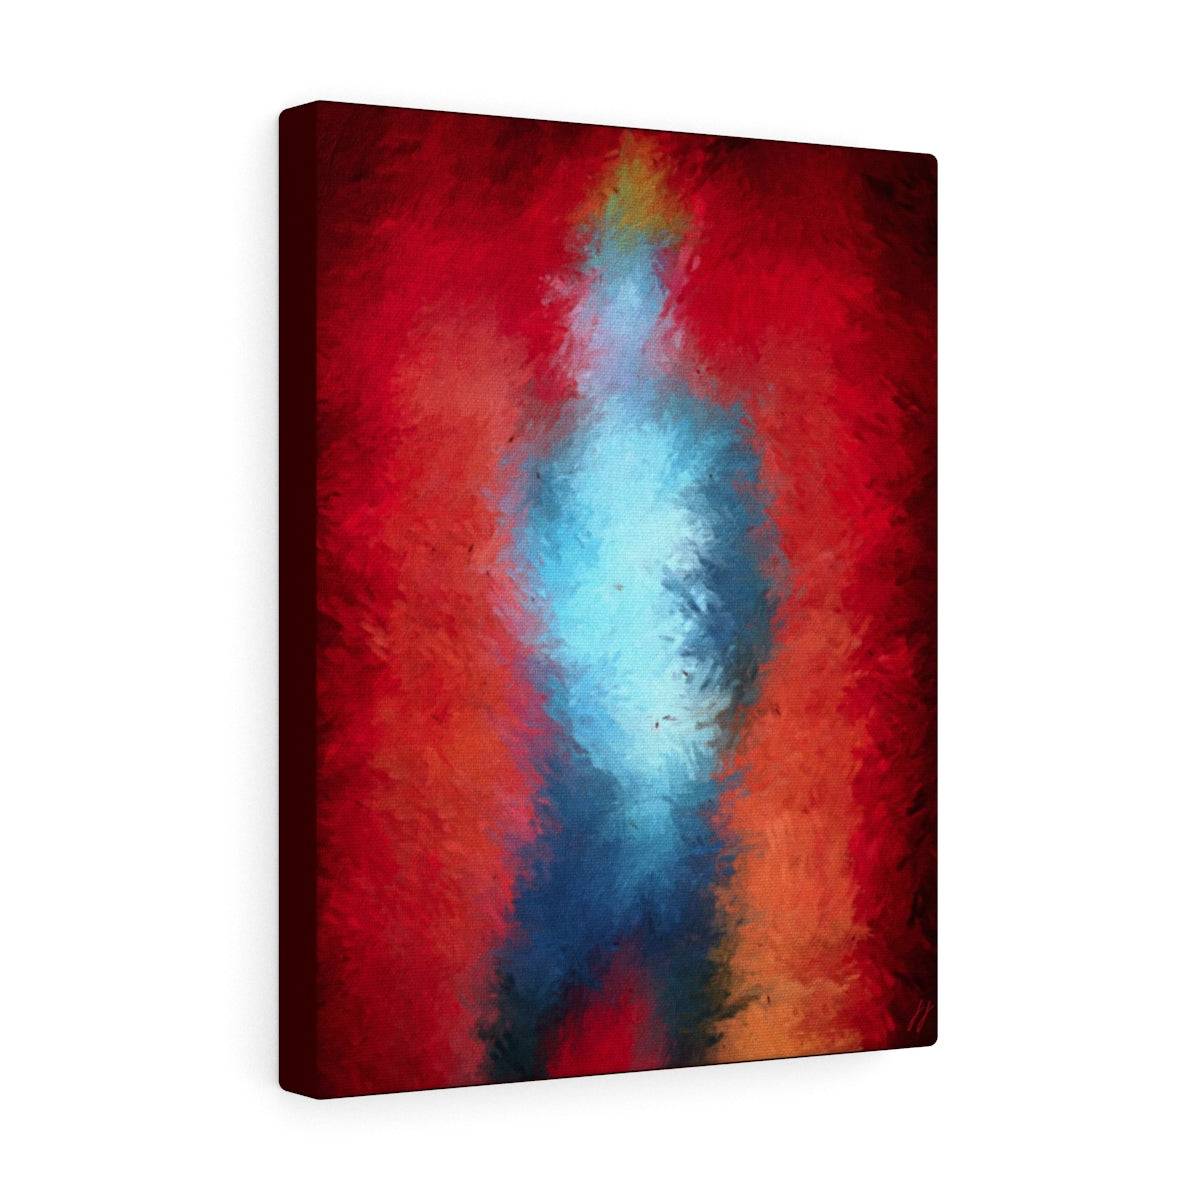 Art Gallery Nine Dimensions Figurative Abstract Art